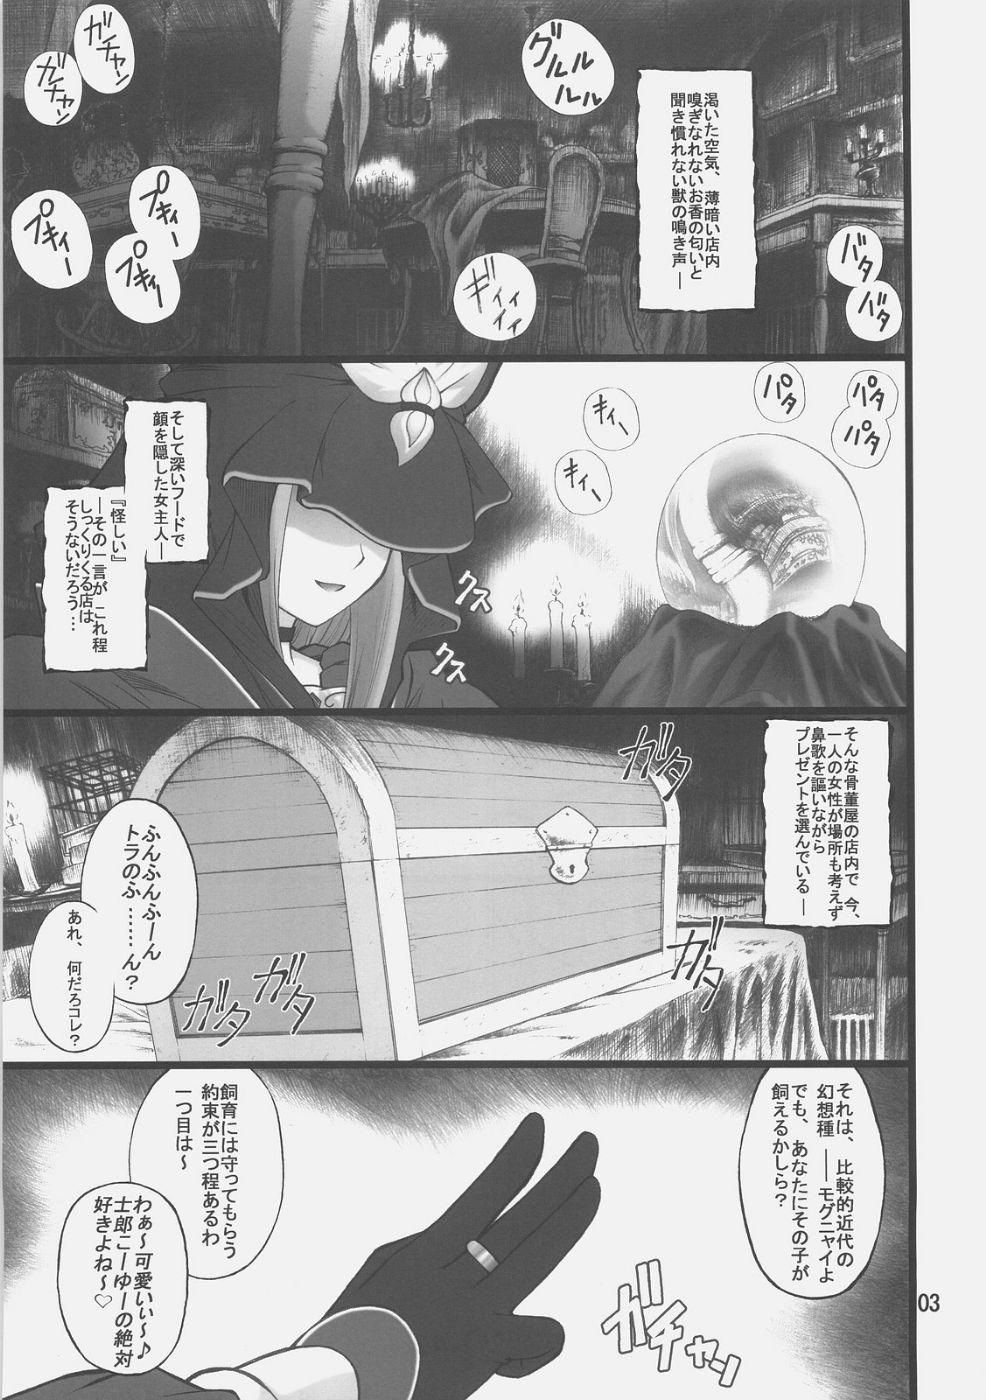 Swingers Grem-Rin 1 - Fate stay night Cuckold - Page 2